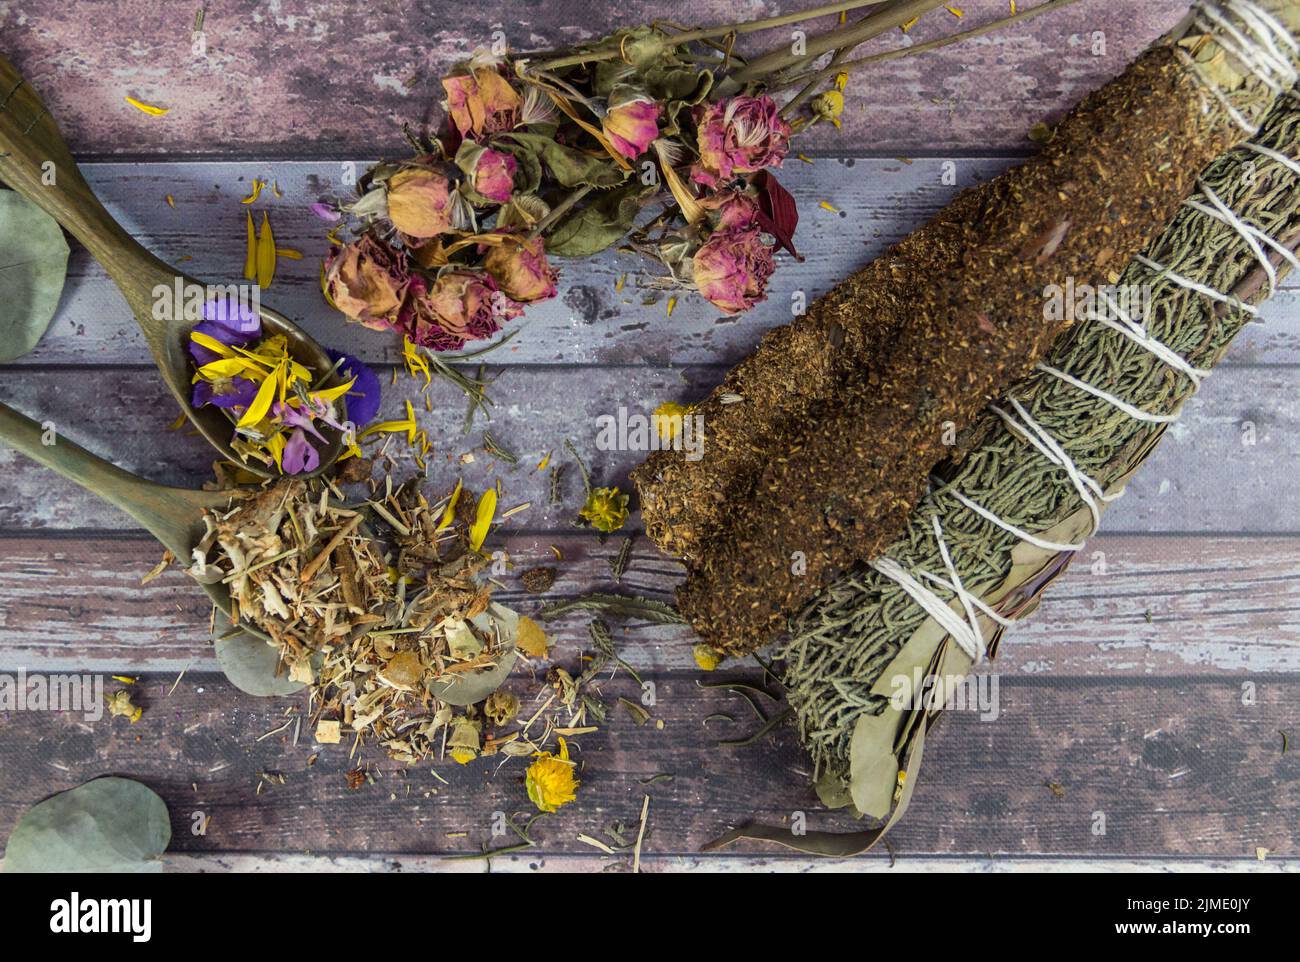 Sahumos, handmade incenses made with herbs and flowers, For cleaning rituals Stock Photo